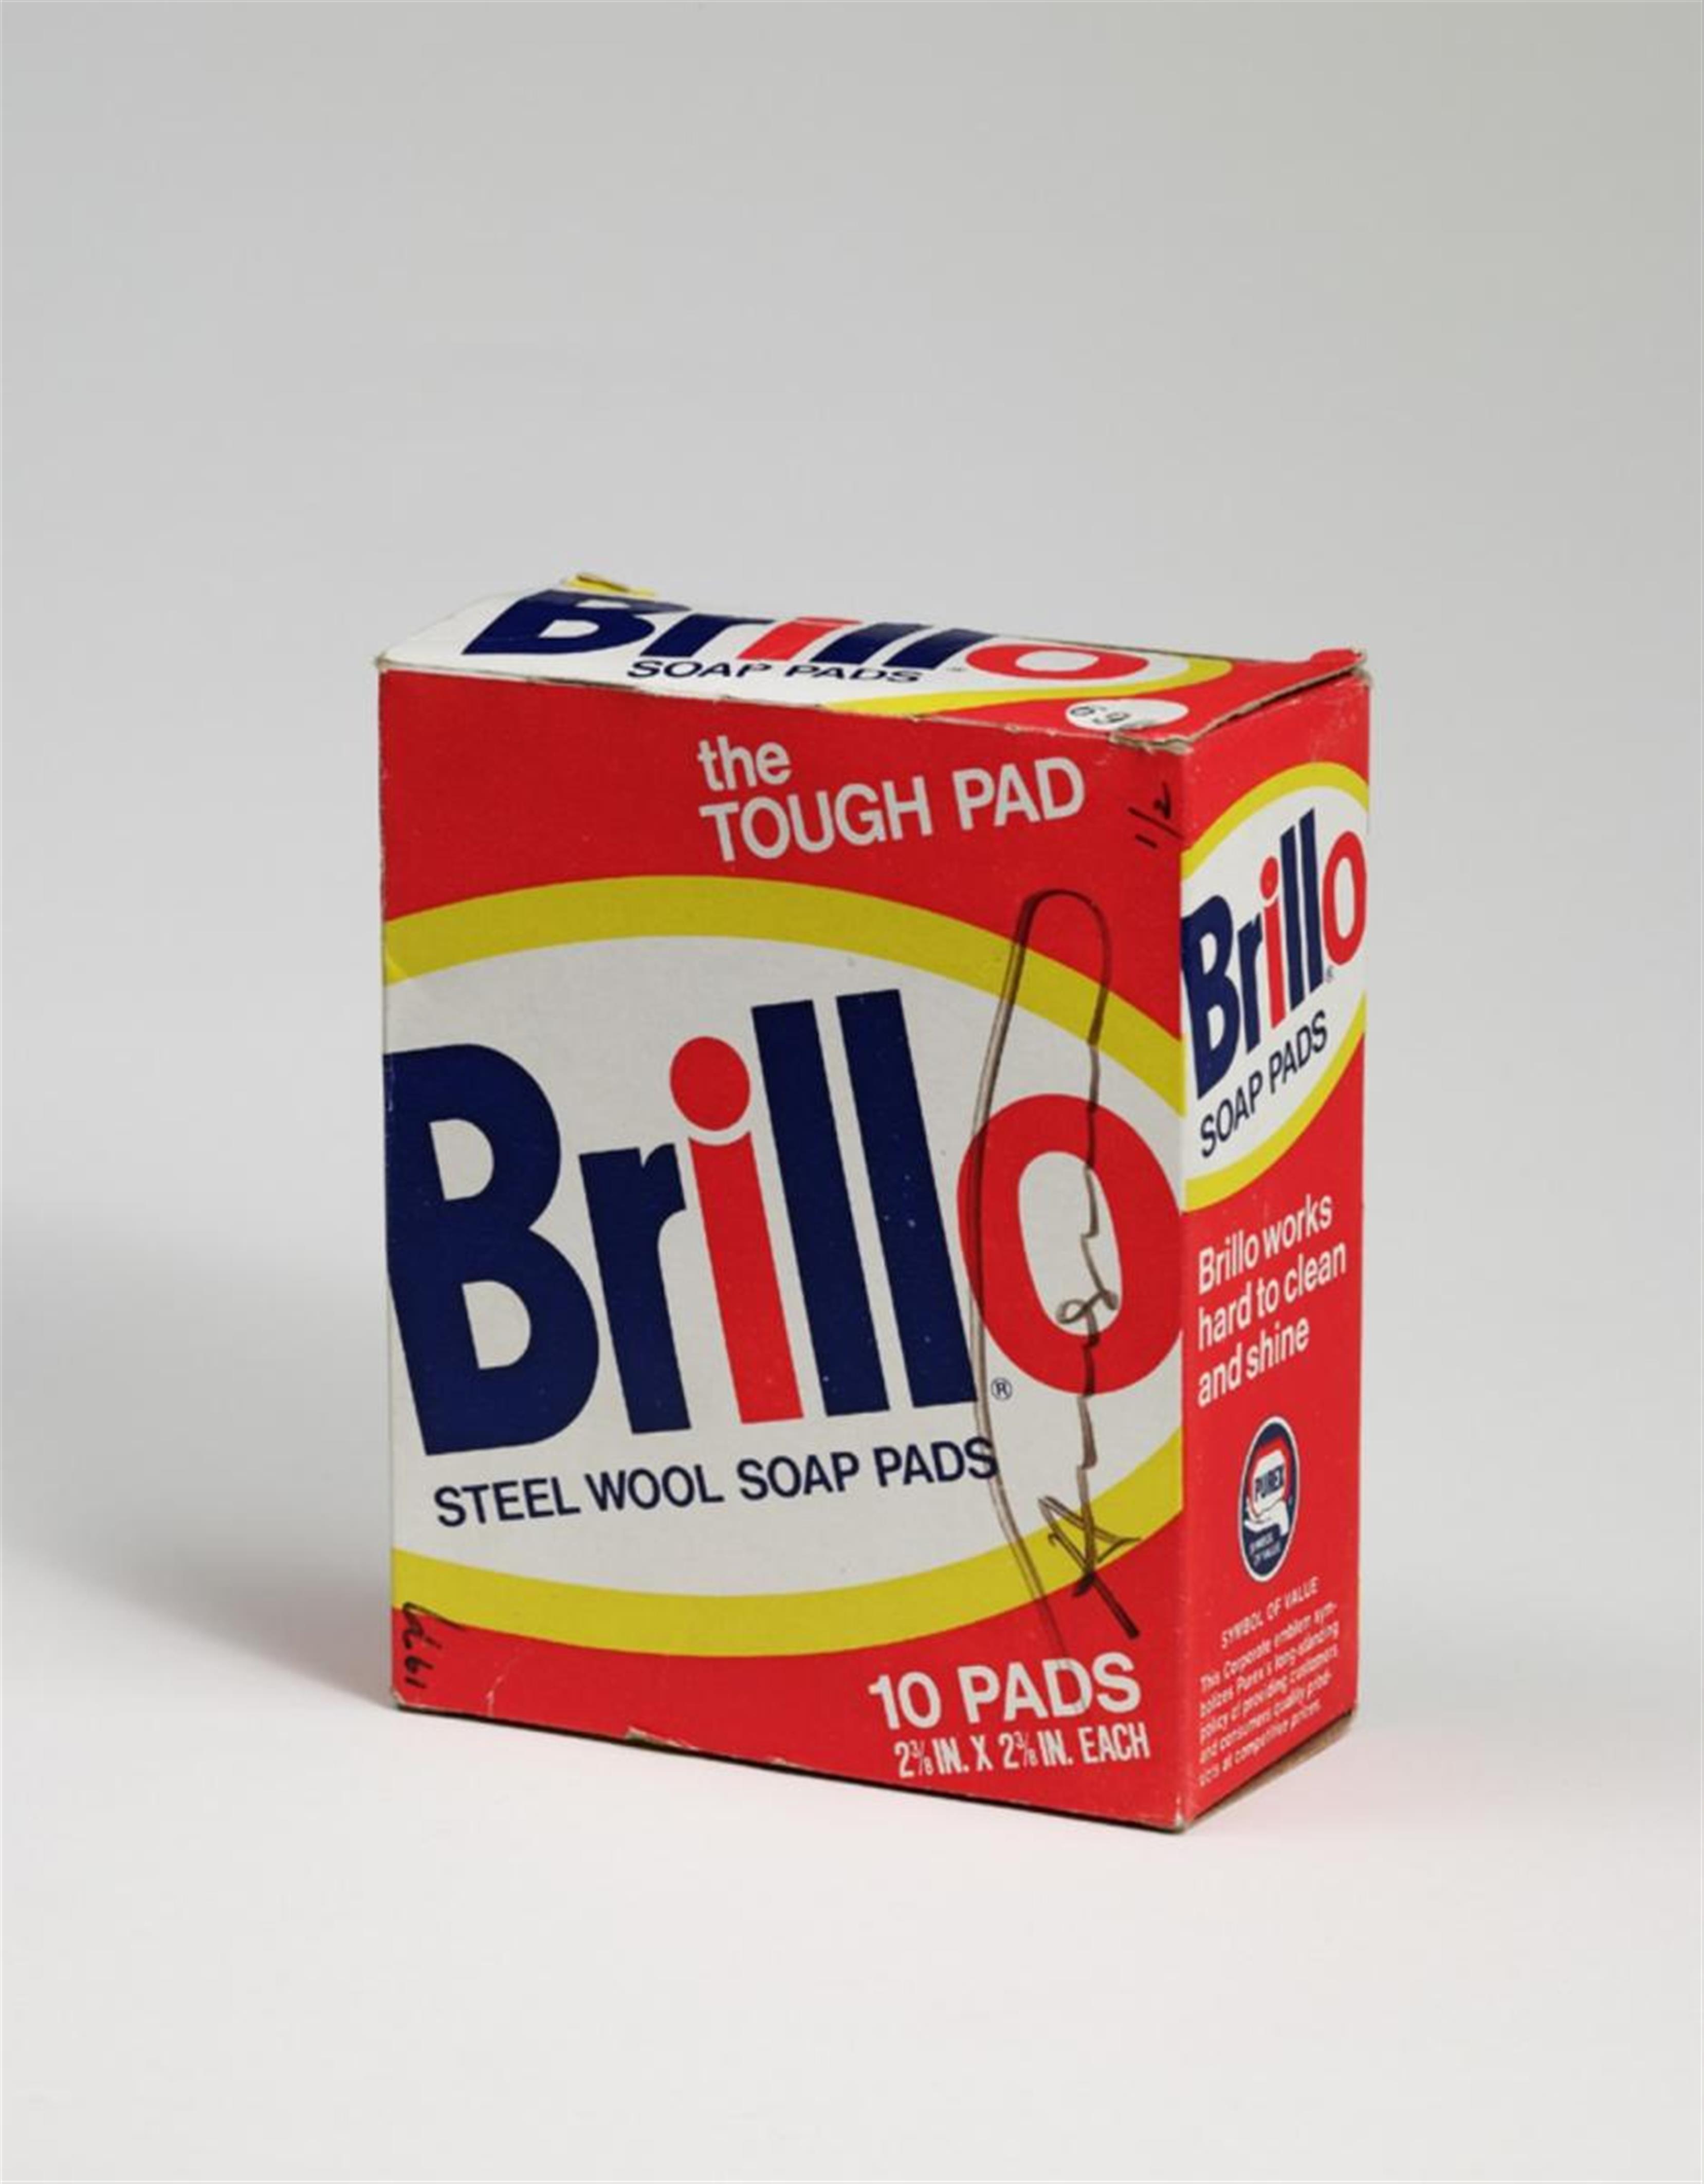 Andy Warhol - Brillo Steel Wool Soap Pads - image-1